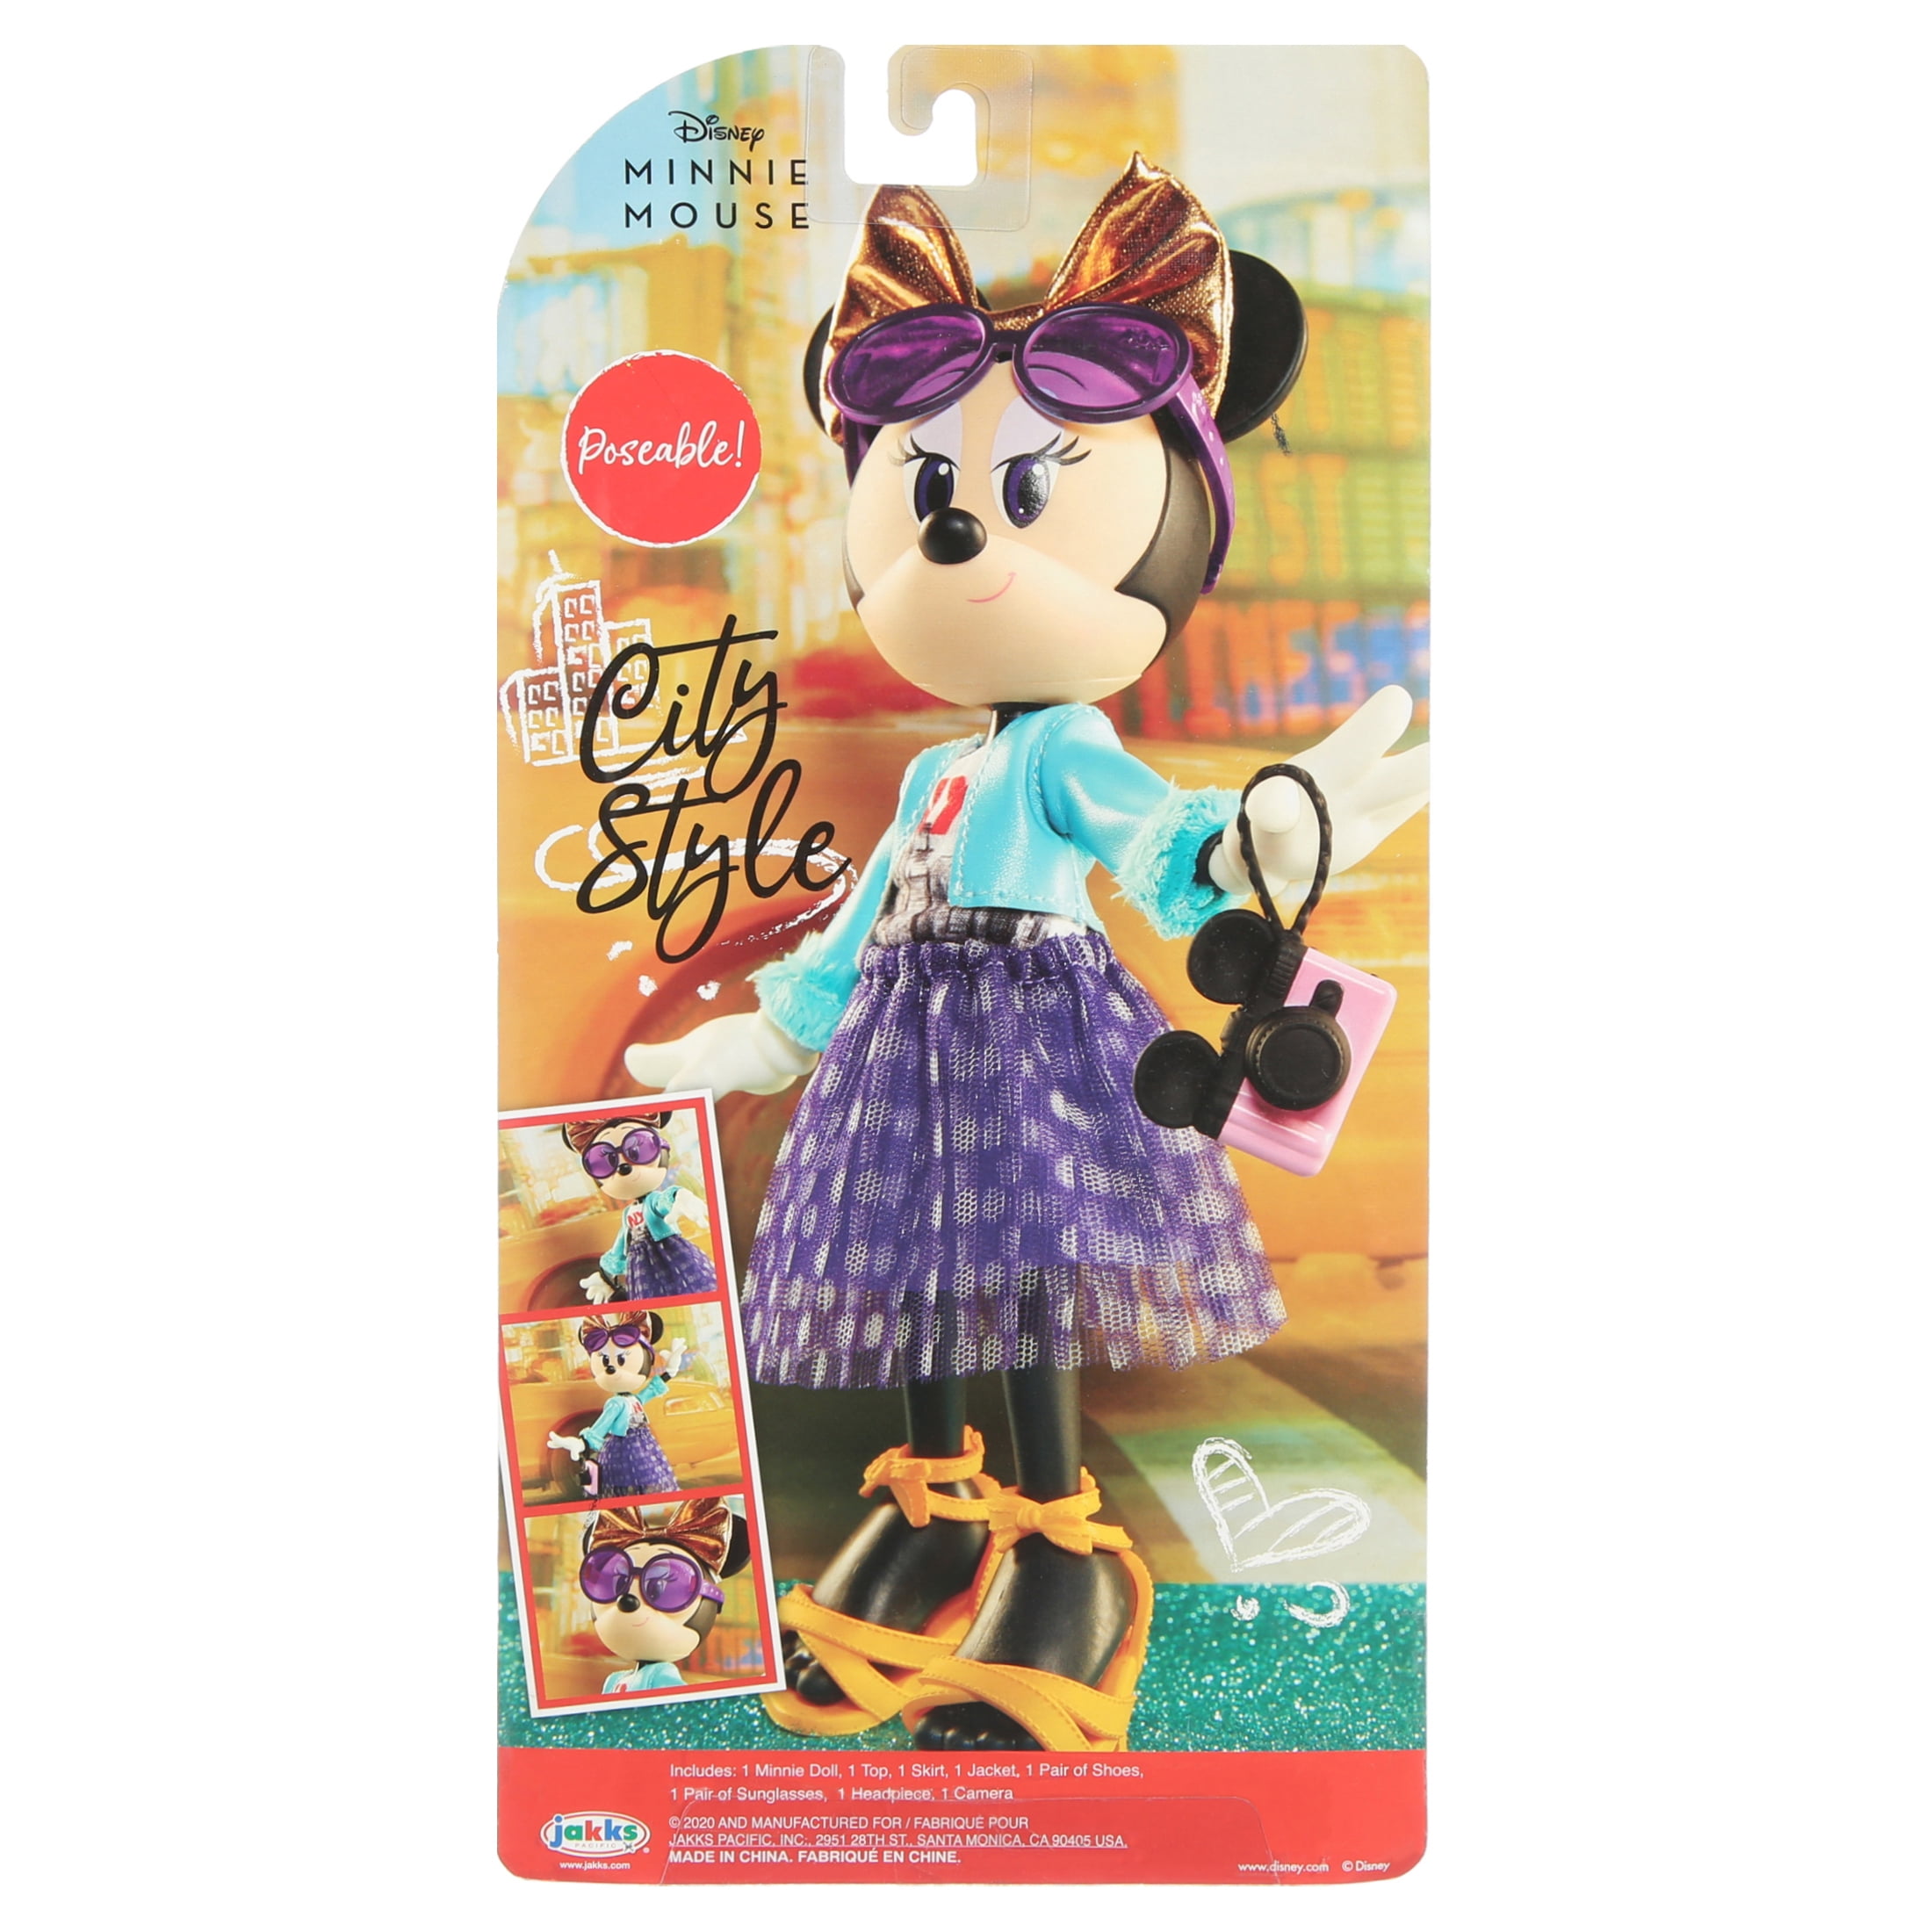 Disney Minnie Mouse City Style Poseable Fashion Doll 10in Only 1 Left for sale online 